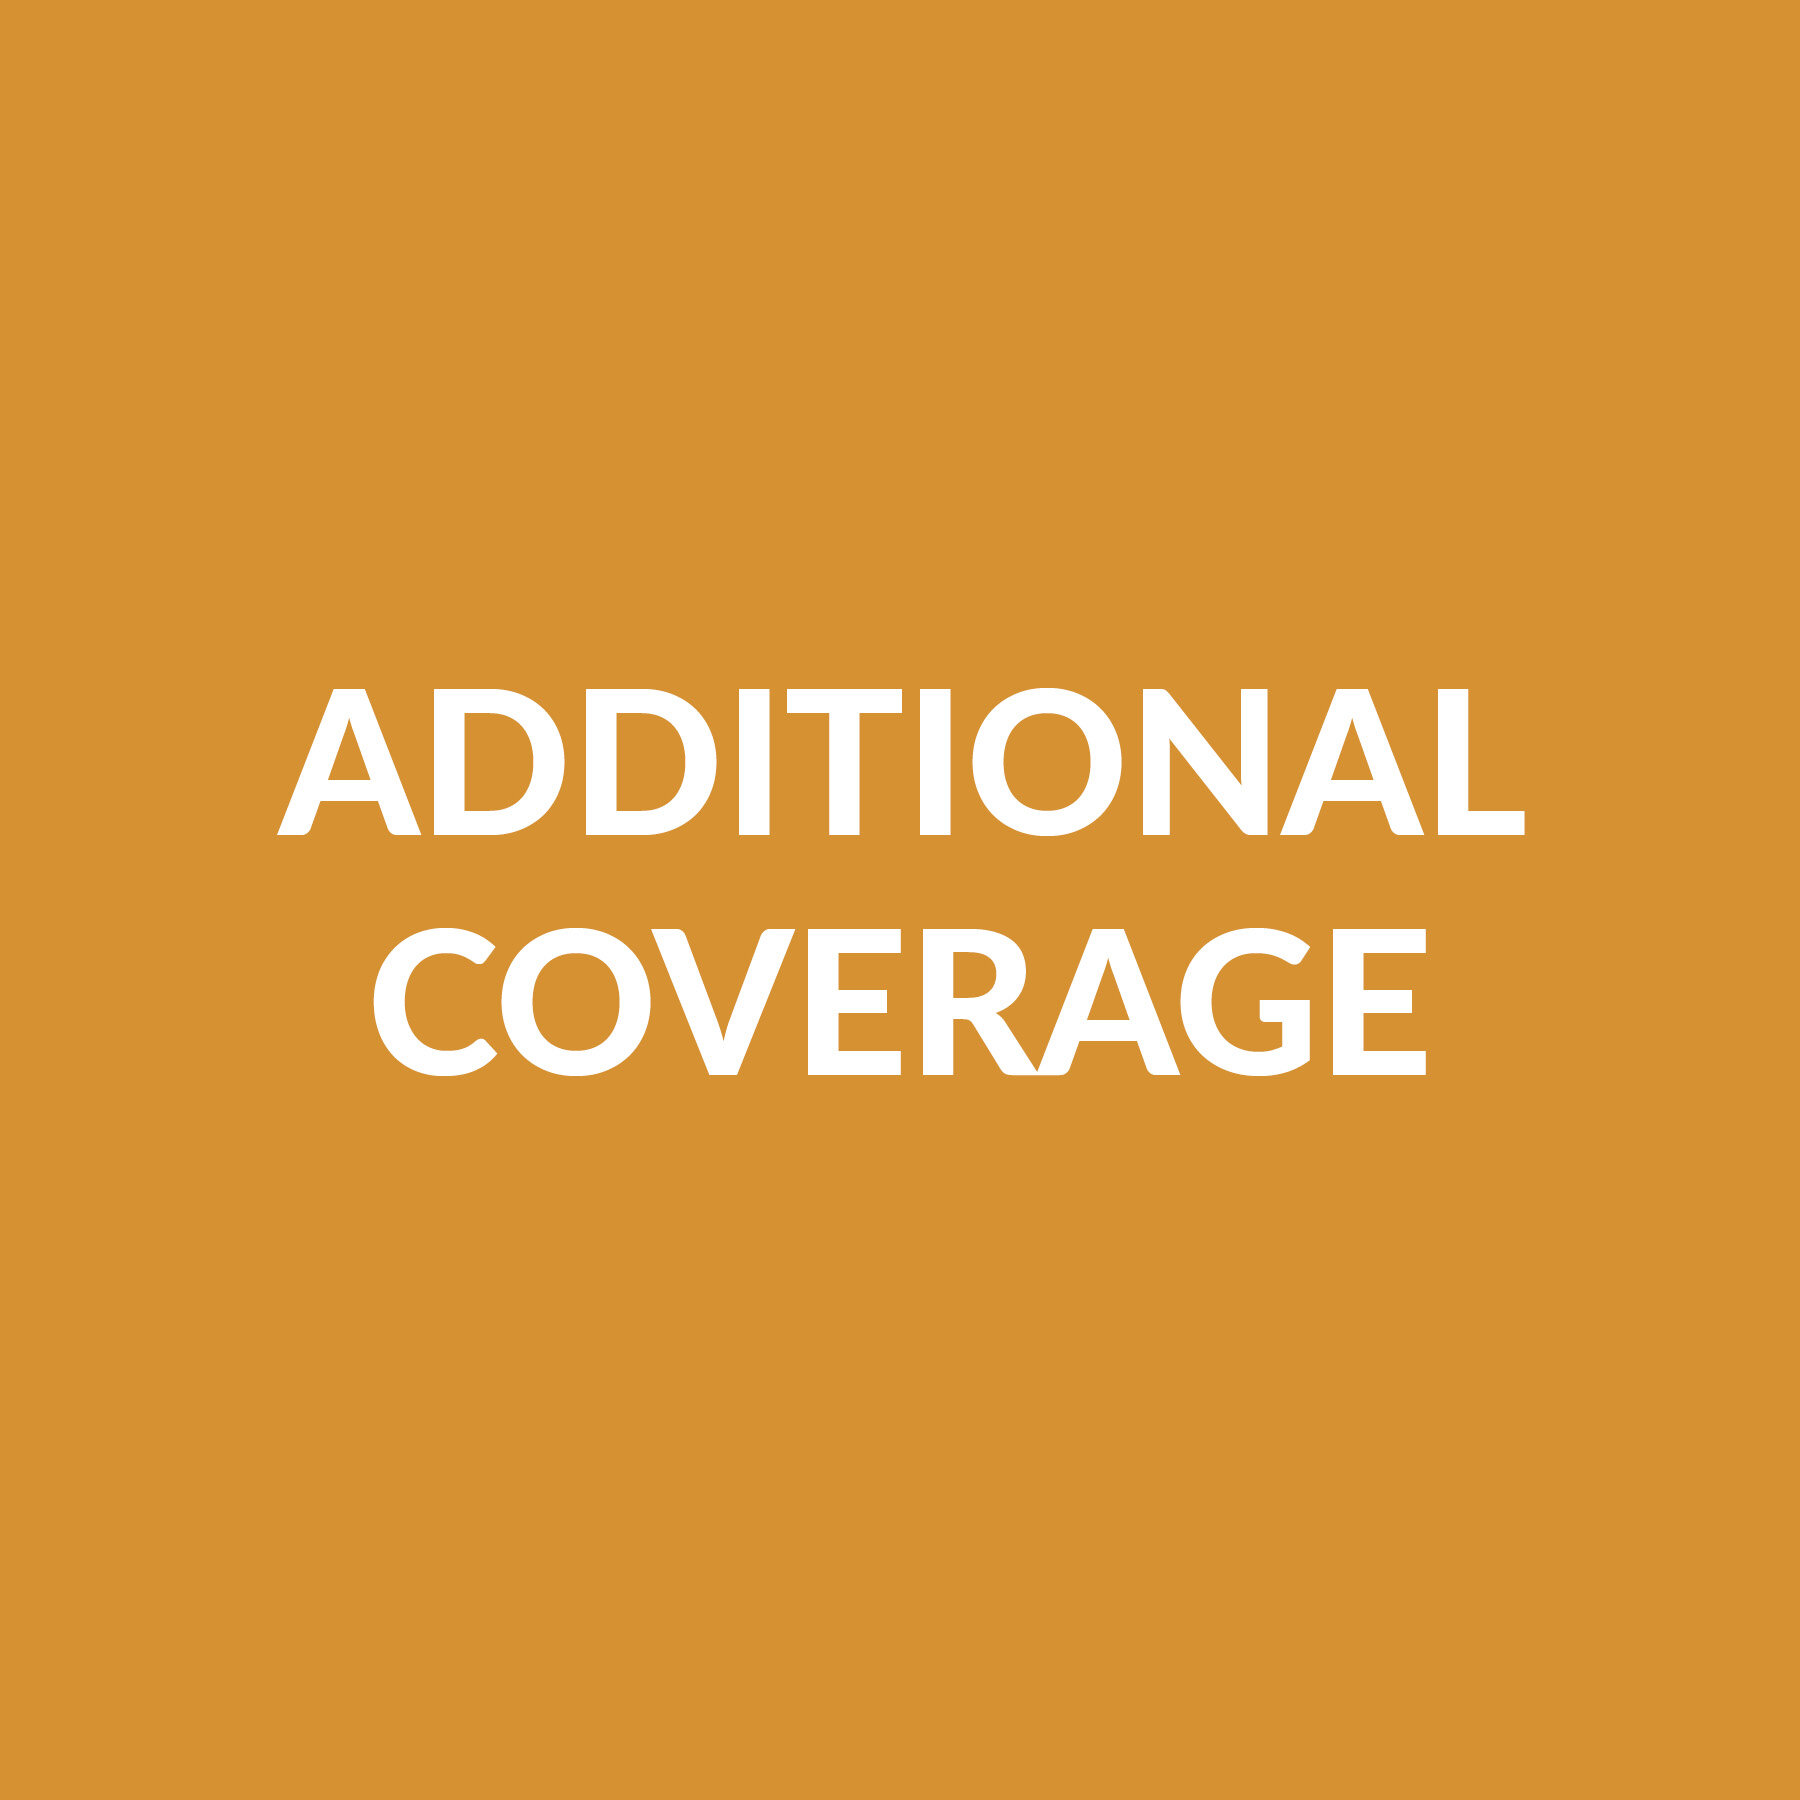 Additional Coverage icon.jpg